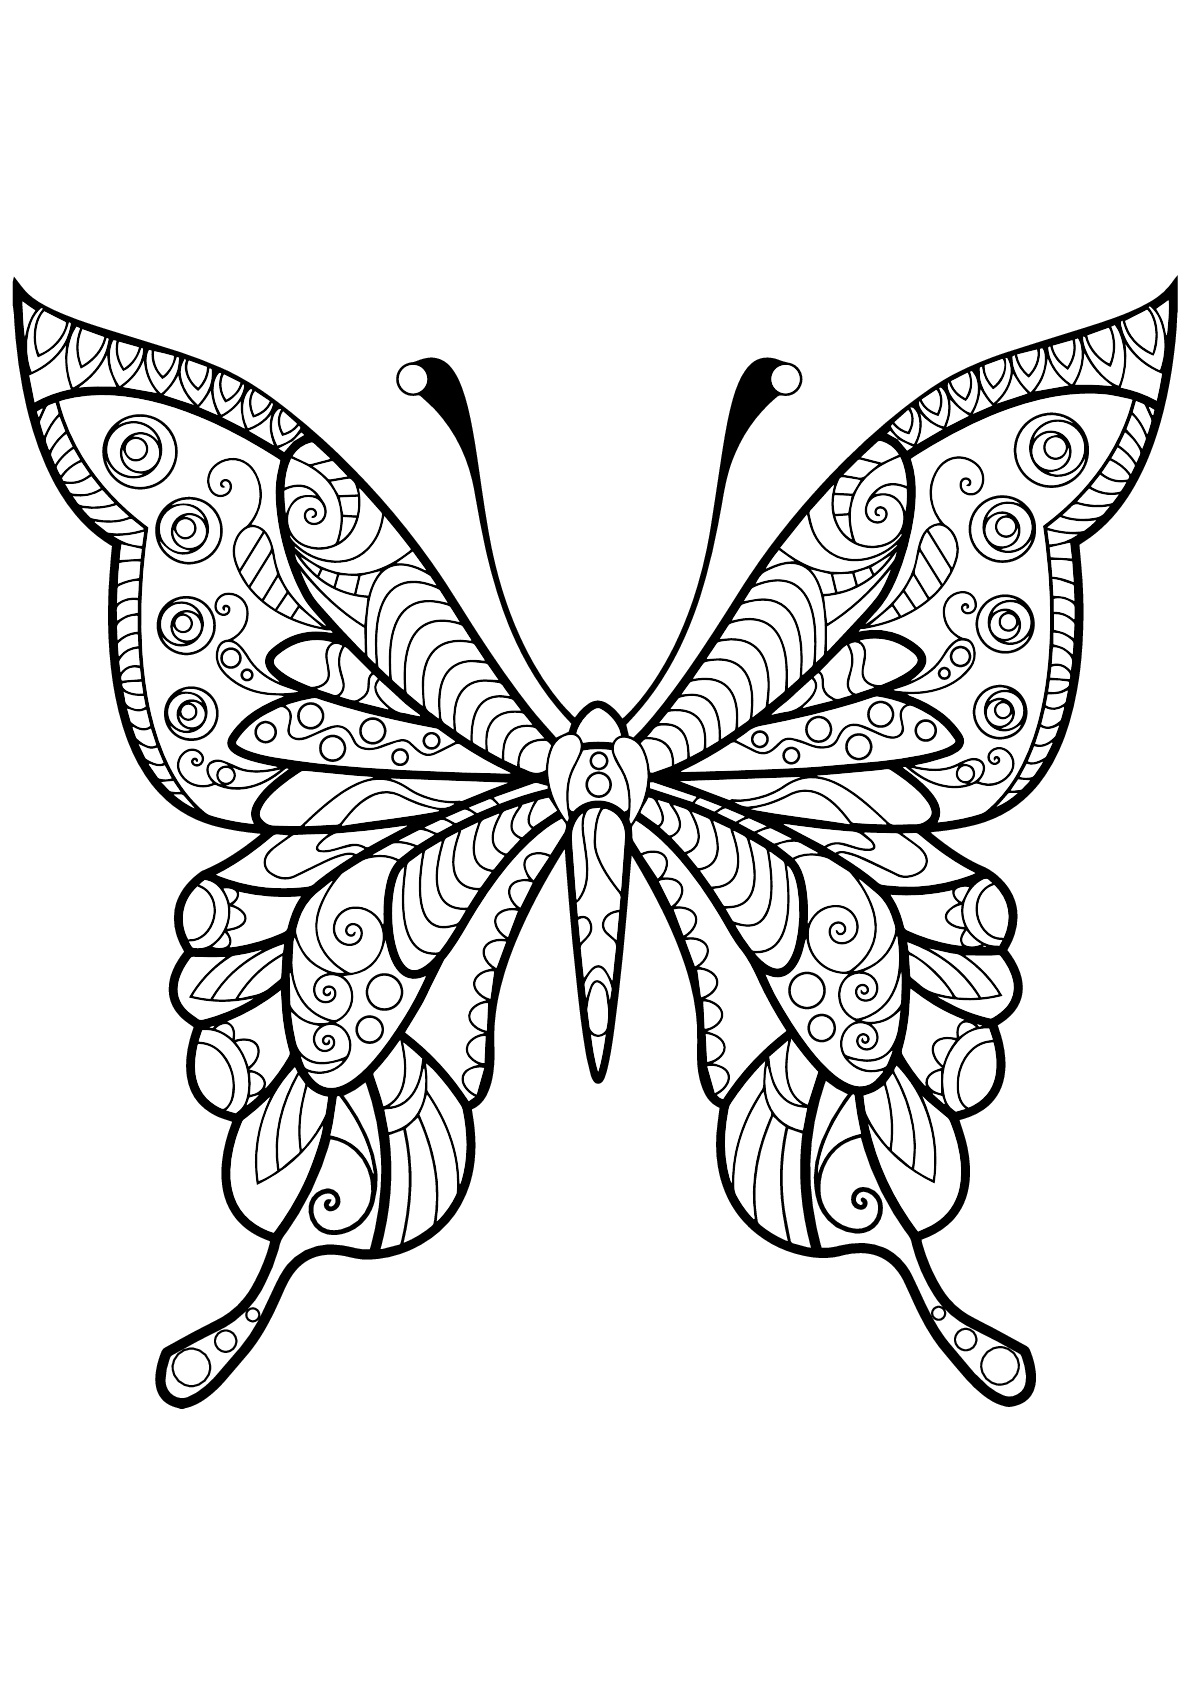 Butterfly beautiful patterns - 4 - Butterflies & insects Adult Coloring ...